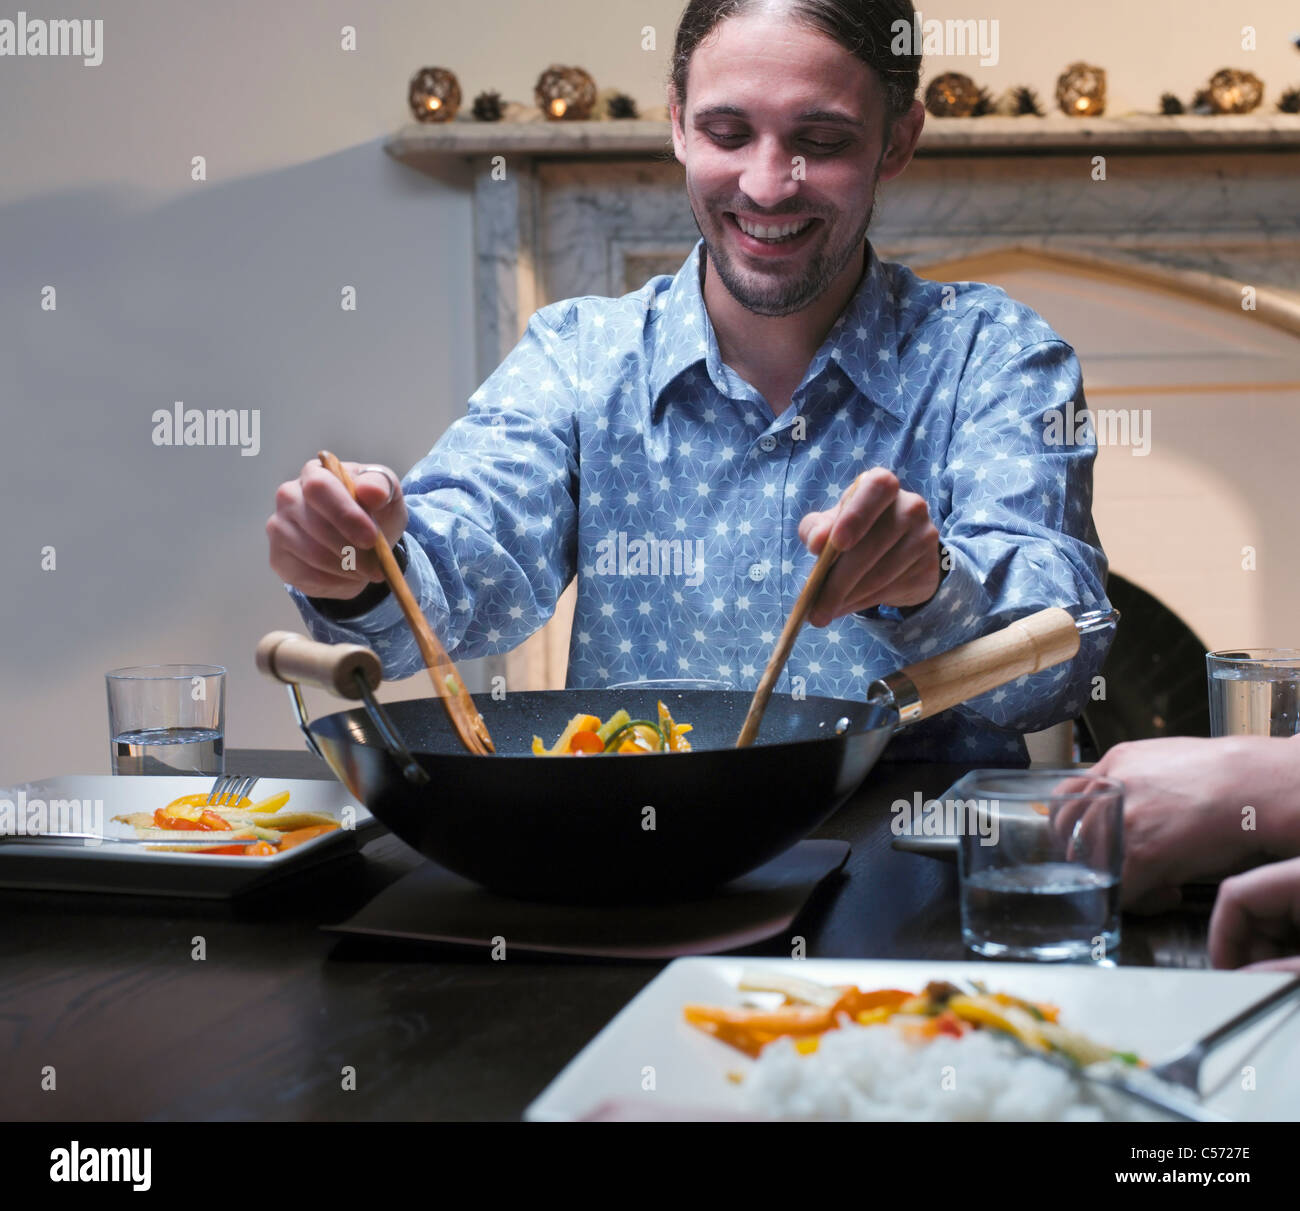 Man serving dinner from wok Stock Photo - Alamy